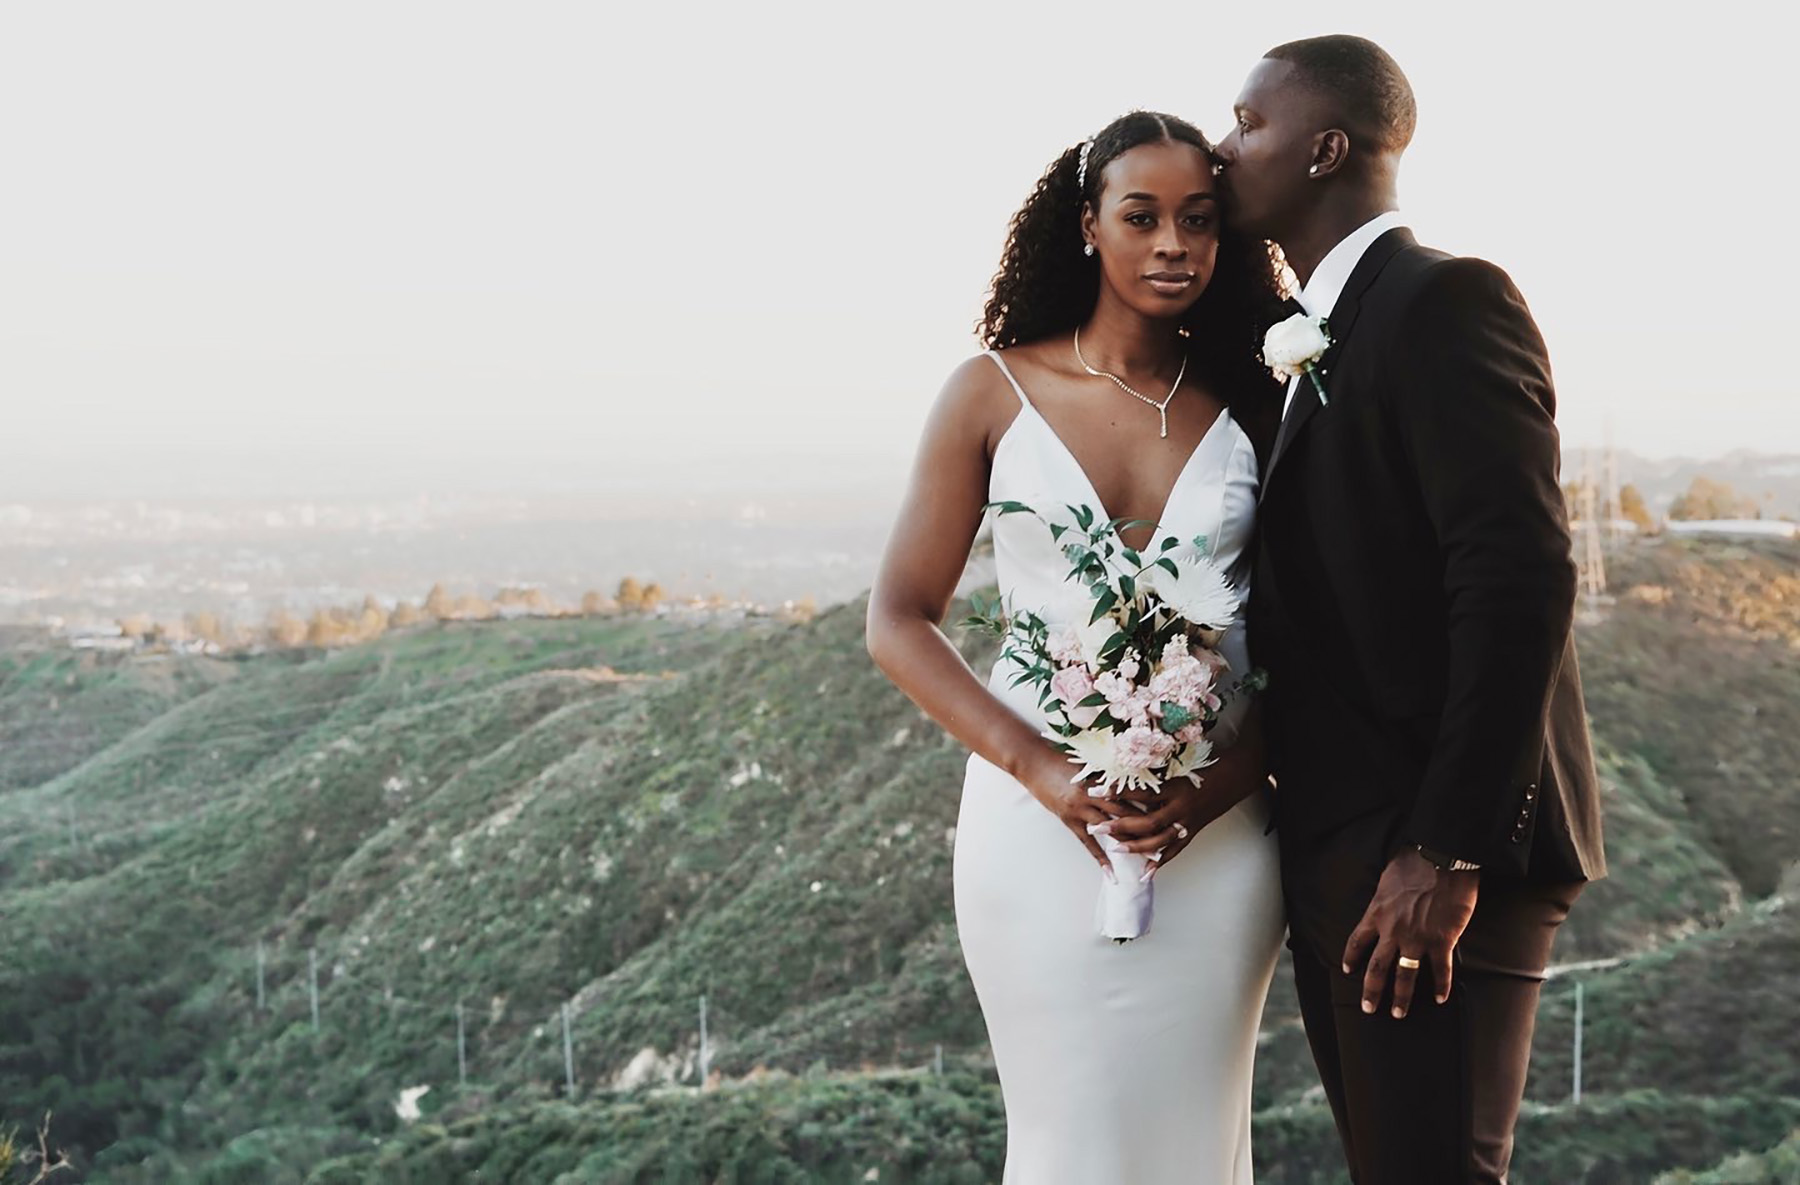 PHOTO: Kiara Brokenbrough didn’t want to go into debt starting her marriage with her husband, Joel, and focused on keeping things affordable for her wedding.